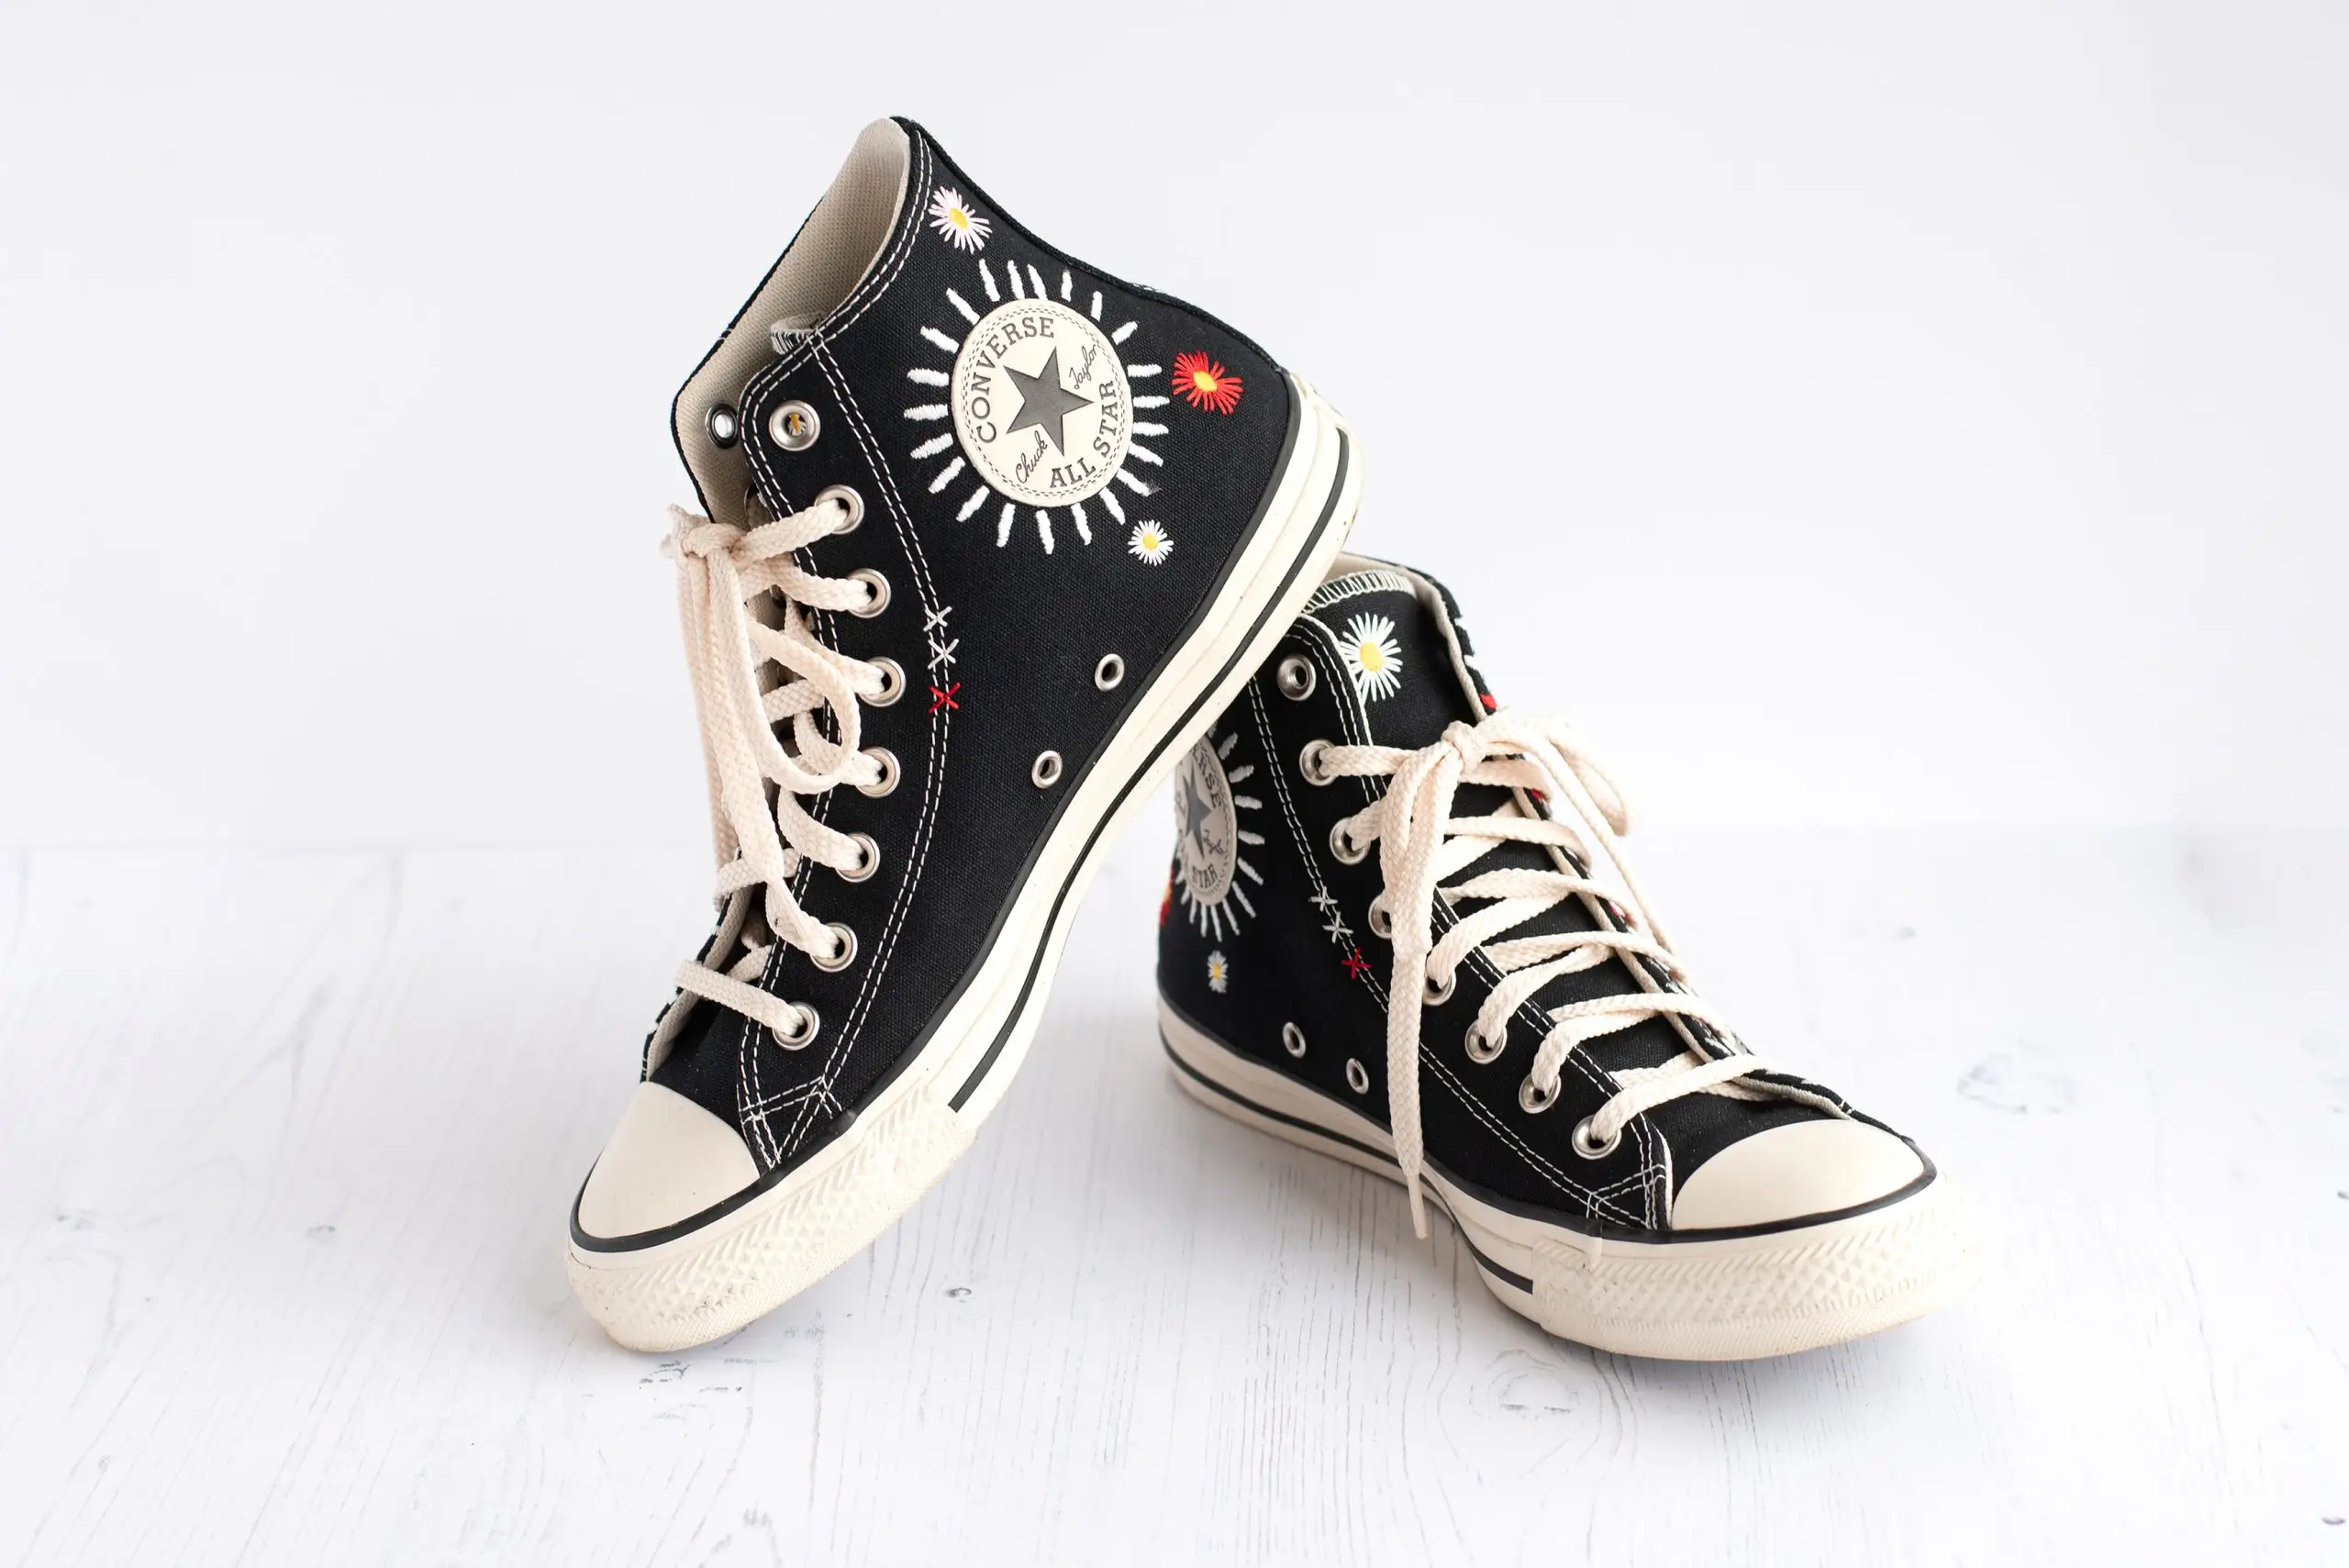 New Size 9.0 & 10.5 Converse All Star BB Shift (Black/Pink